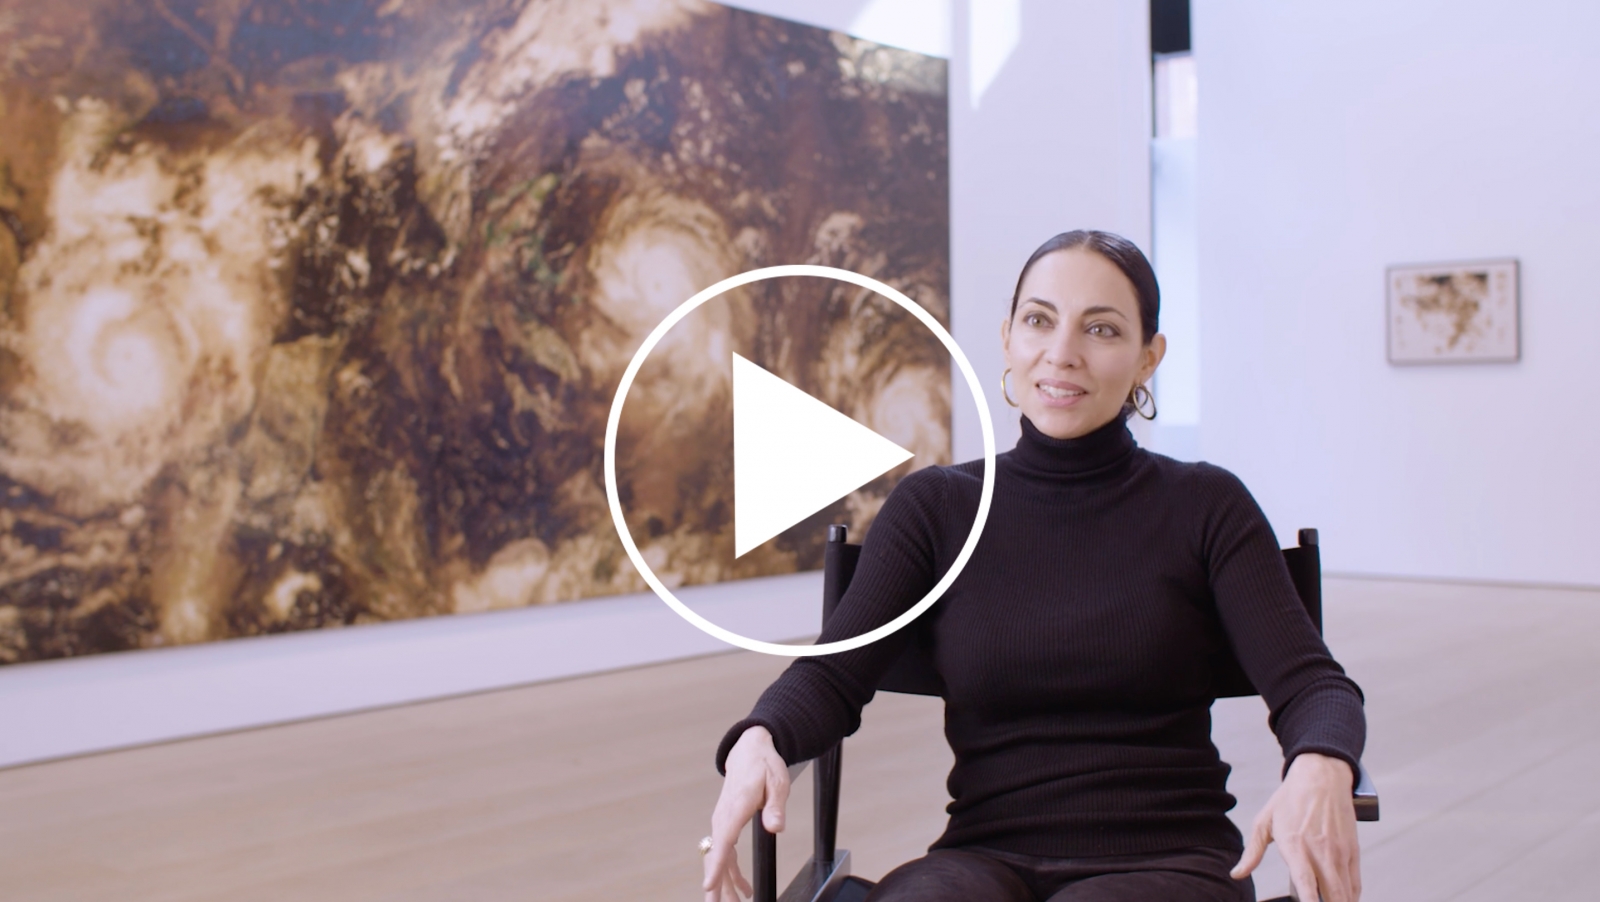 Teresita Fern&aacute;ndez on Maelstrom, Hear the artist&rsquo;s perspective on the research and ideas behind the exhibition. Film&nbsp;by Rava Films